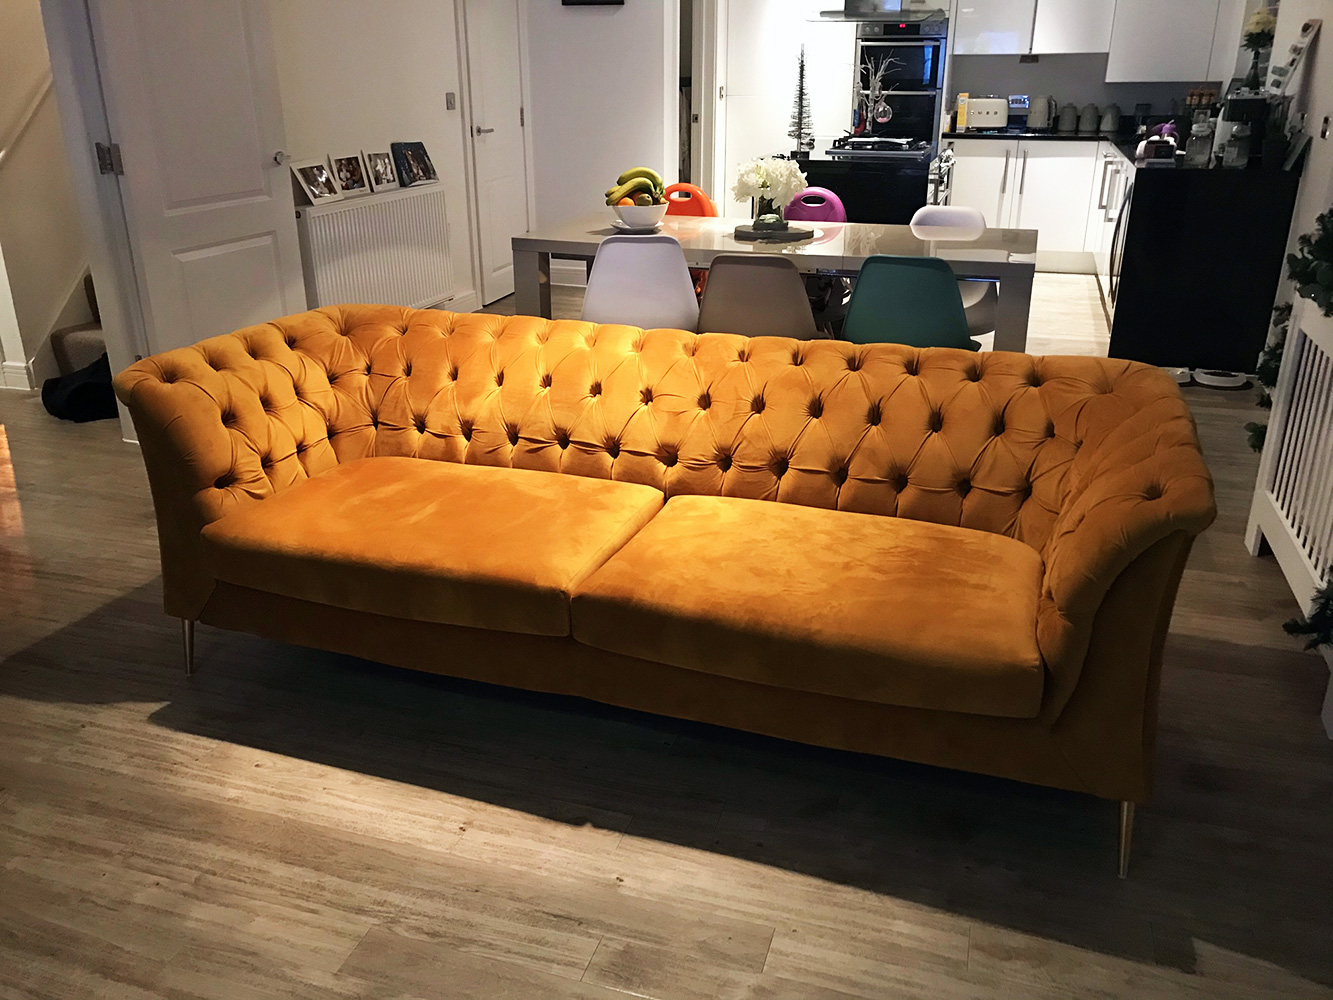 Mustard Chesterfield Modern sofa, gold-colored legs